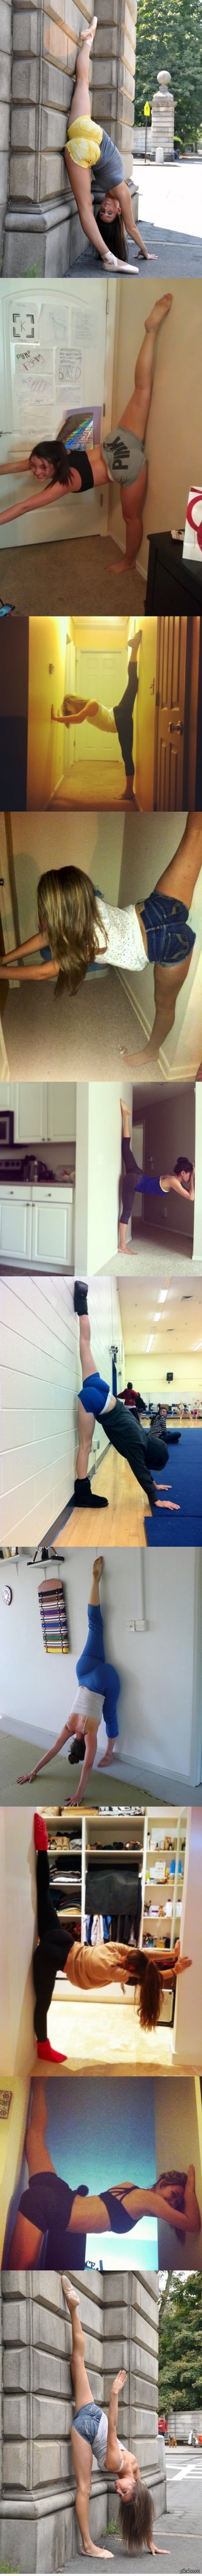 Girls with a good stretch are amazing - NSFW, Girls, Wall, Booty, Stretching, Longpost